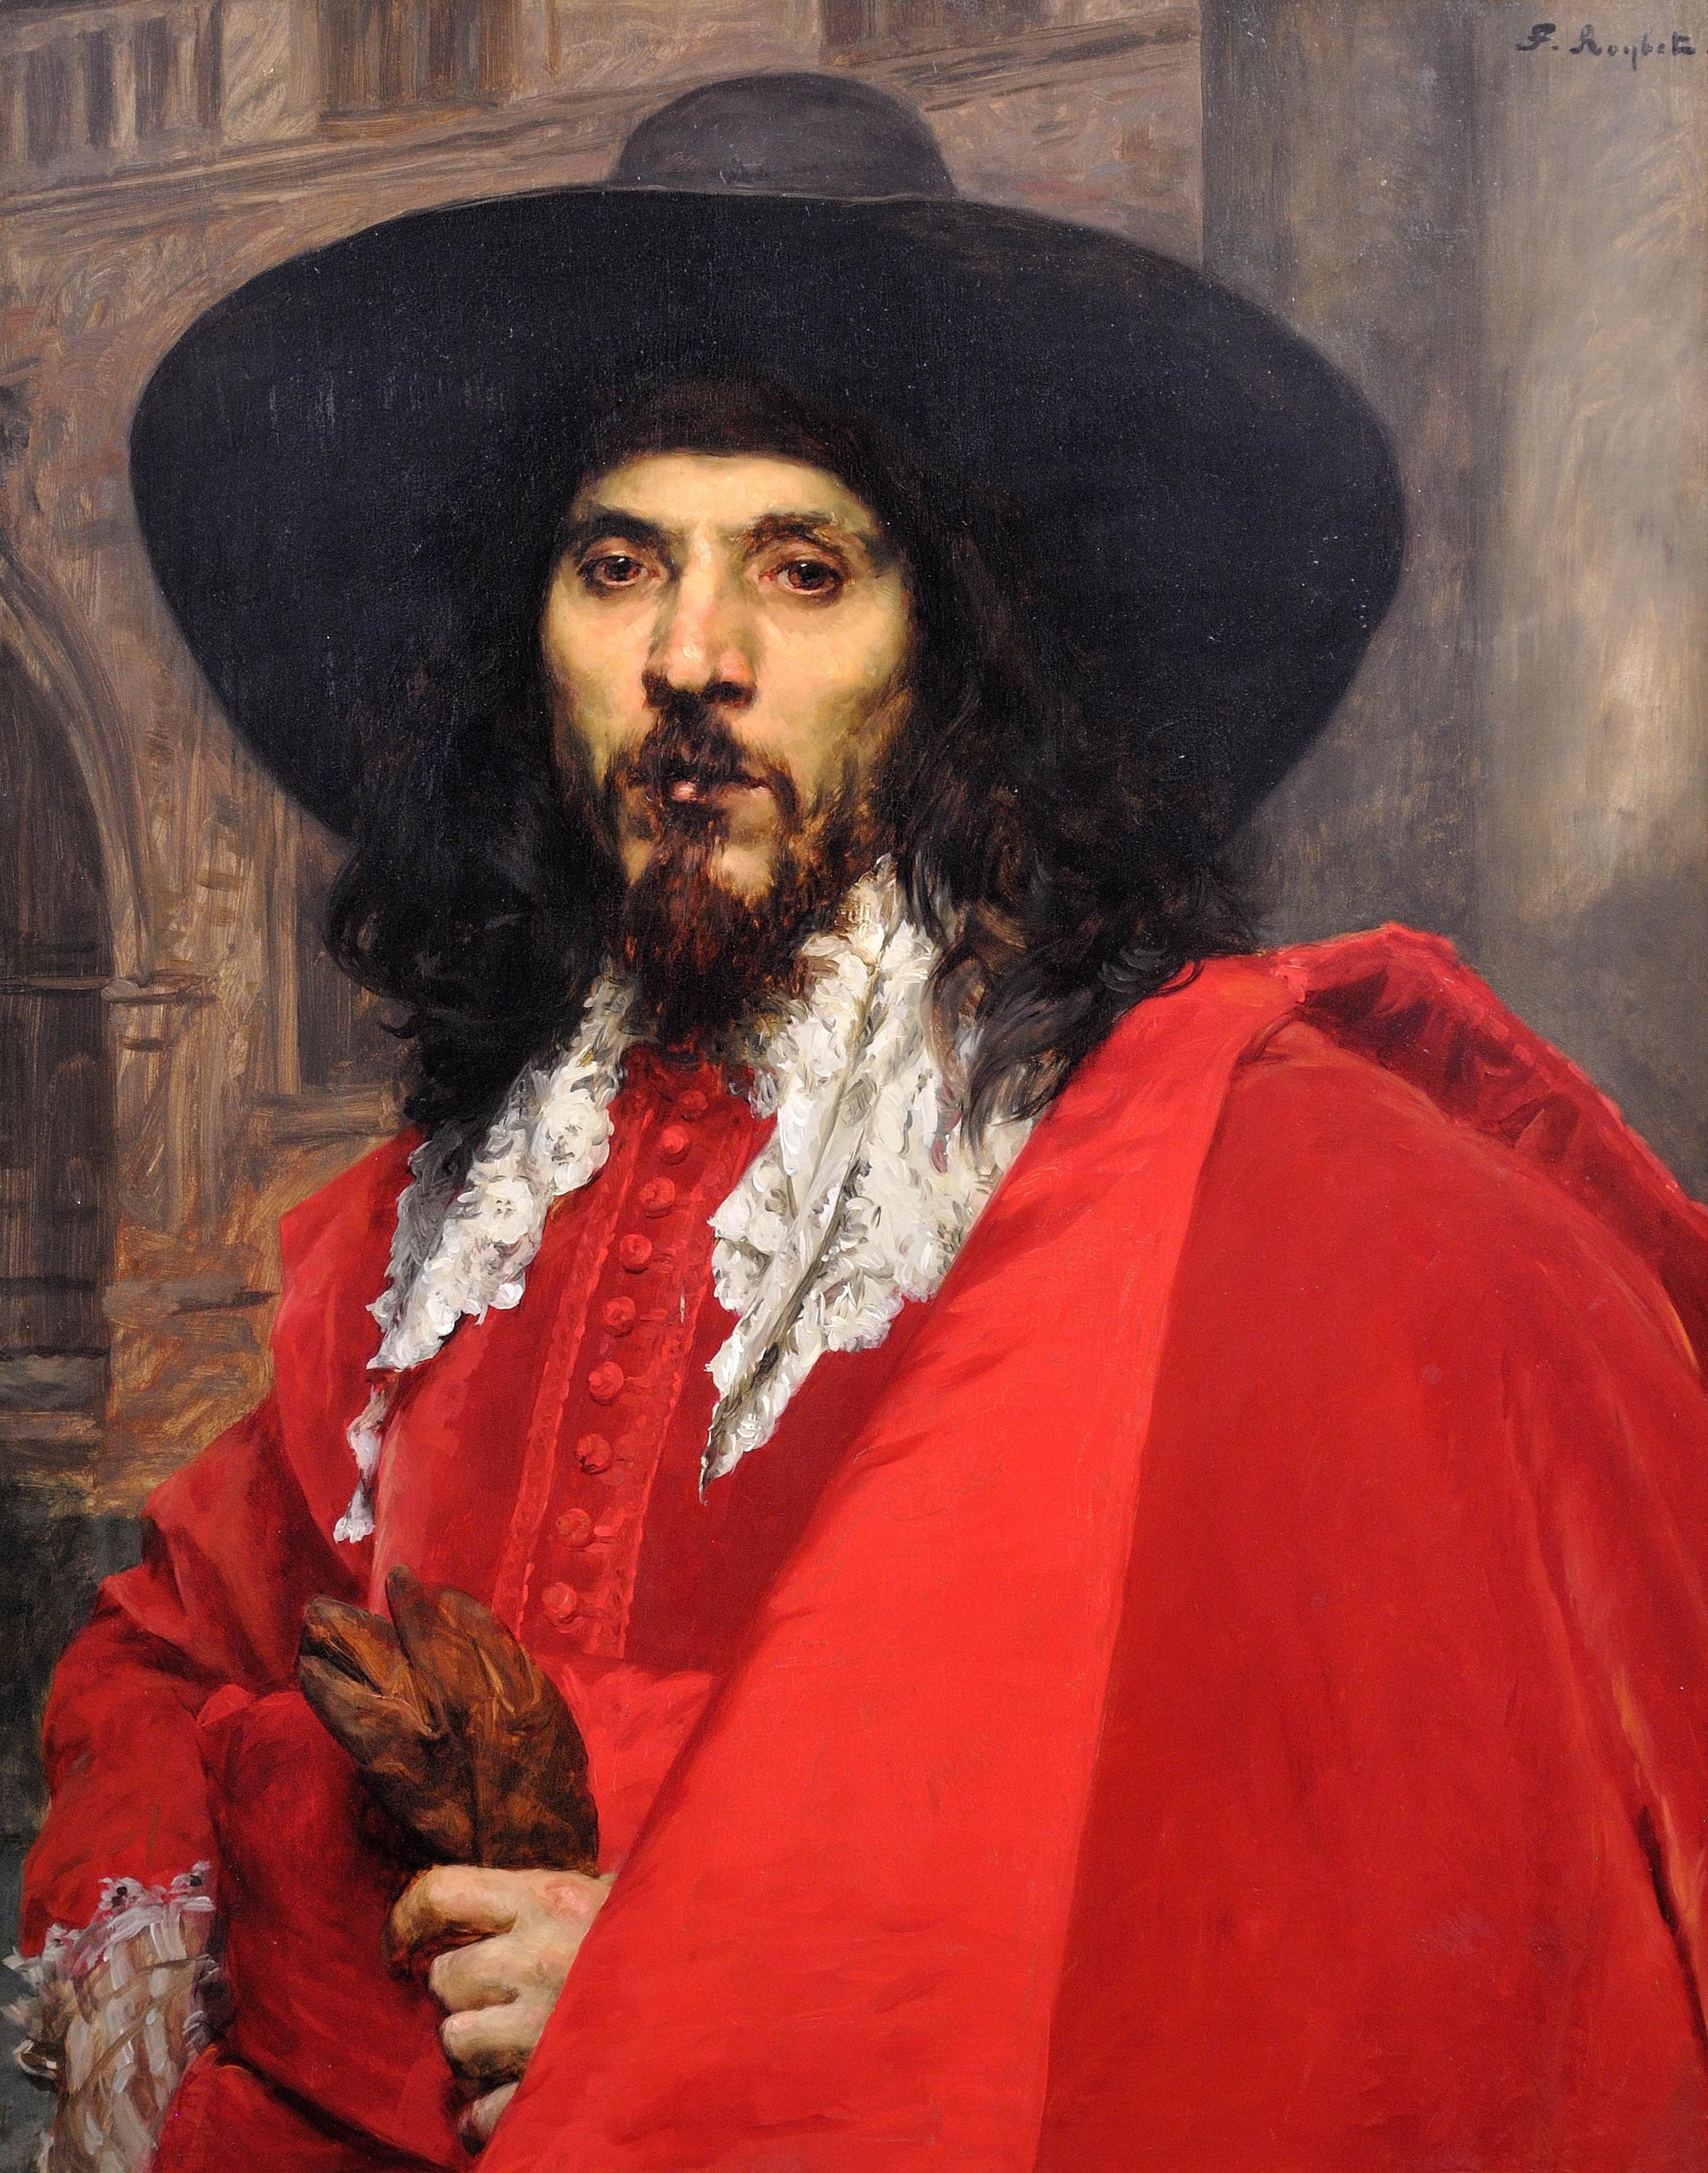 Le Mousquetaire.Musketeer.Cavalier.Spanish Tradition.Diego Velázquez Influence. - Painting by Ferdinand Victor Leon Roybet 